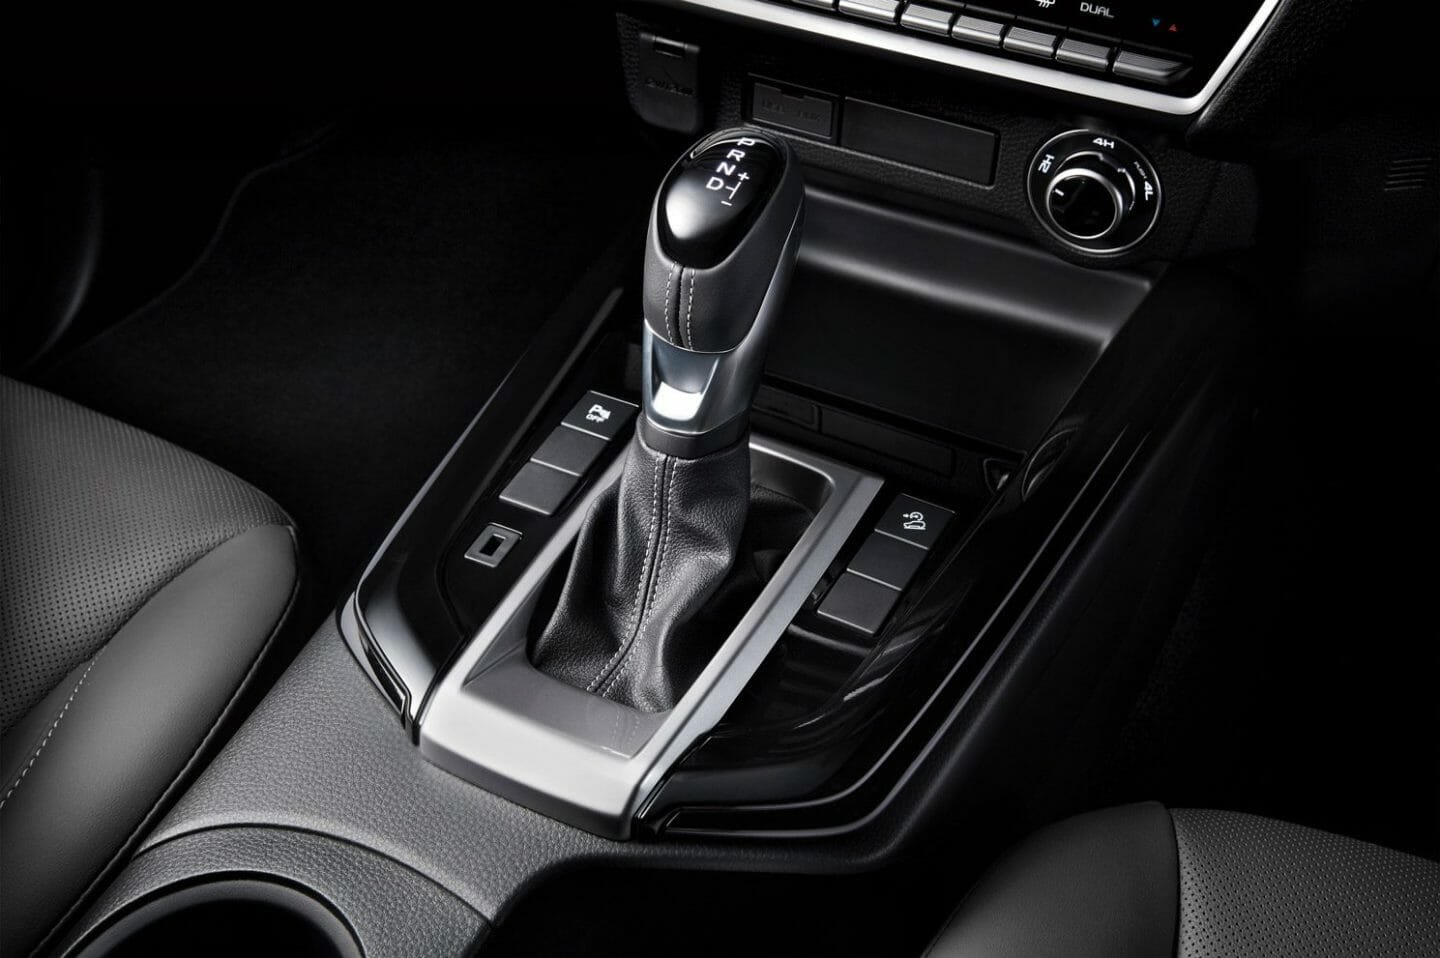 6-Speed Automatic with Sequential Shift